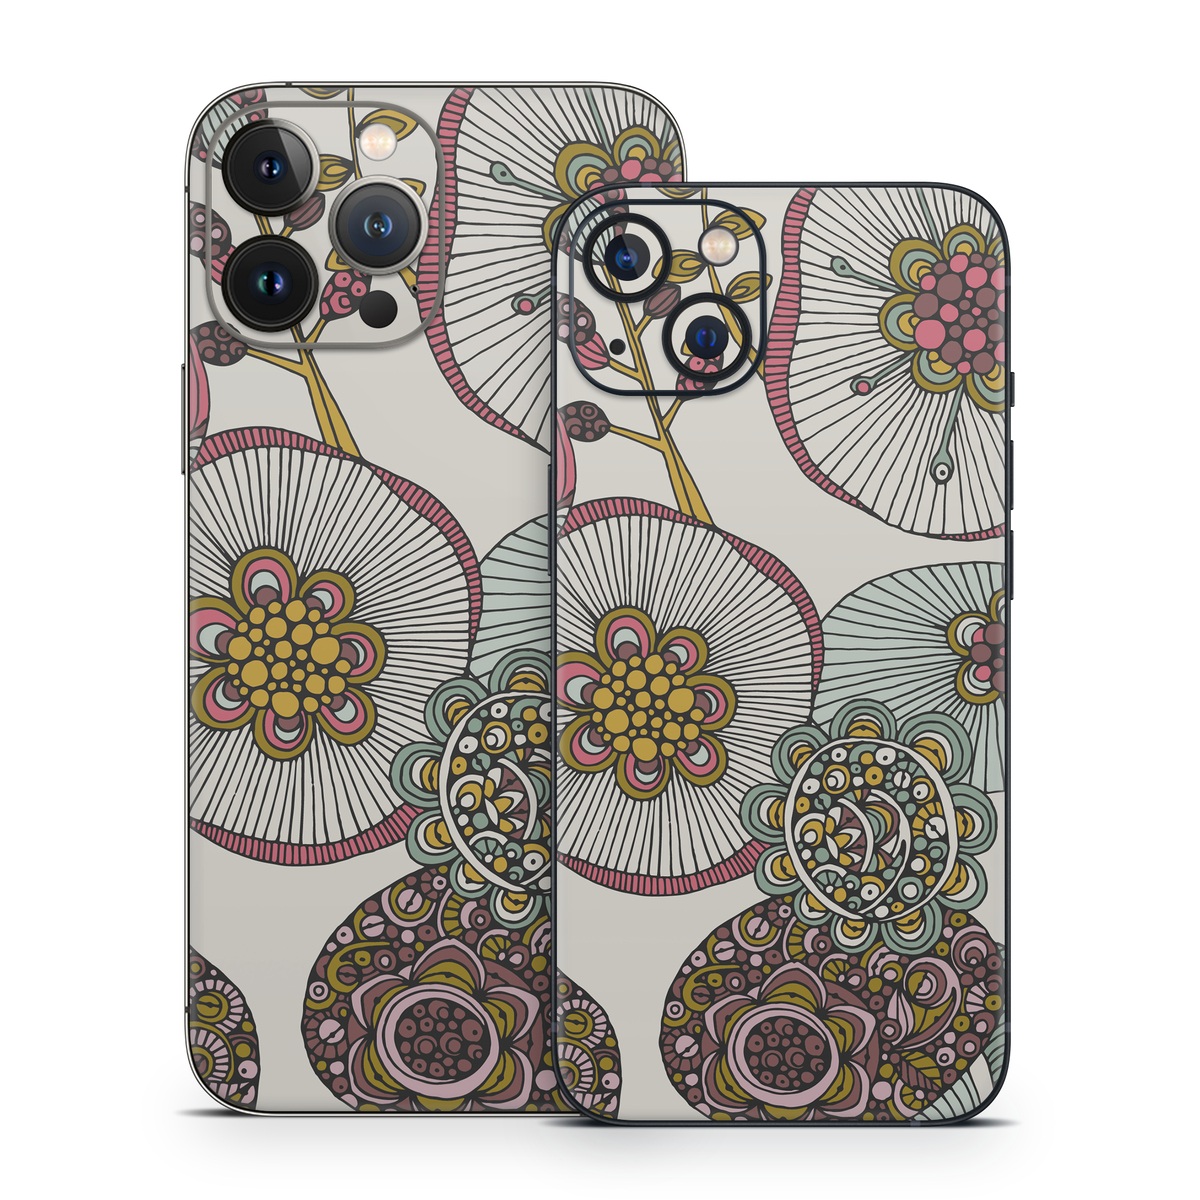 iPhone 13 Series Skin design of Pattern, Textile, Botany, Visual arts, Motif, Design, Needlework, Circle, Floral design, with gray, pink, green, blue, purple colors